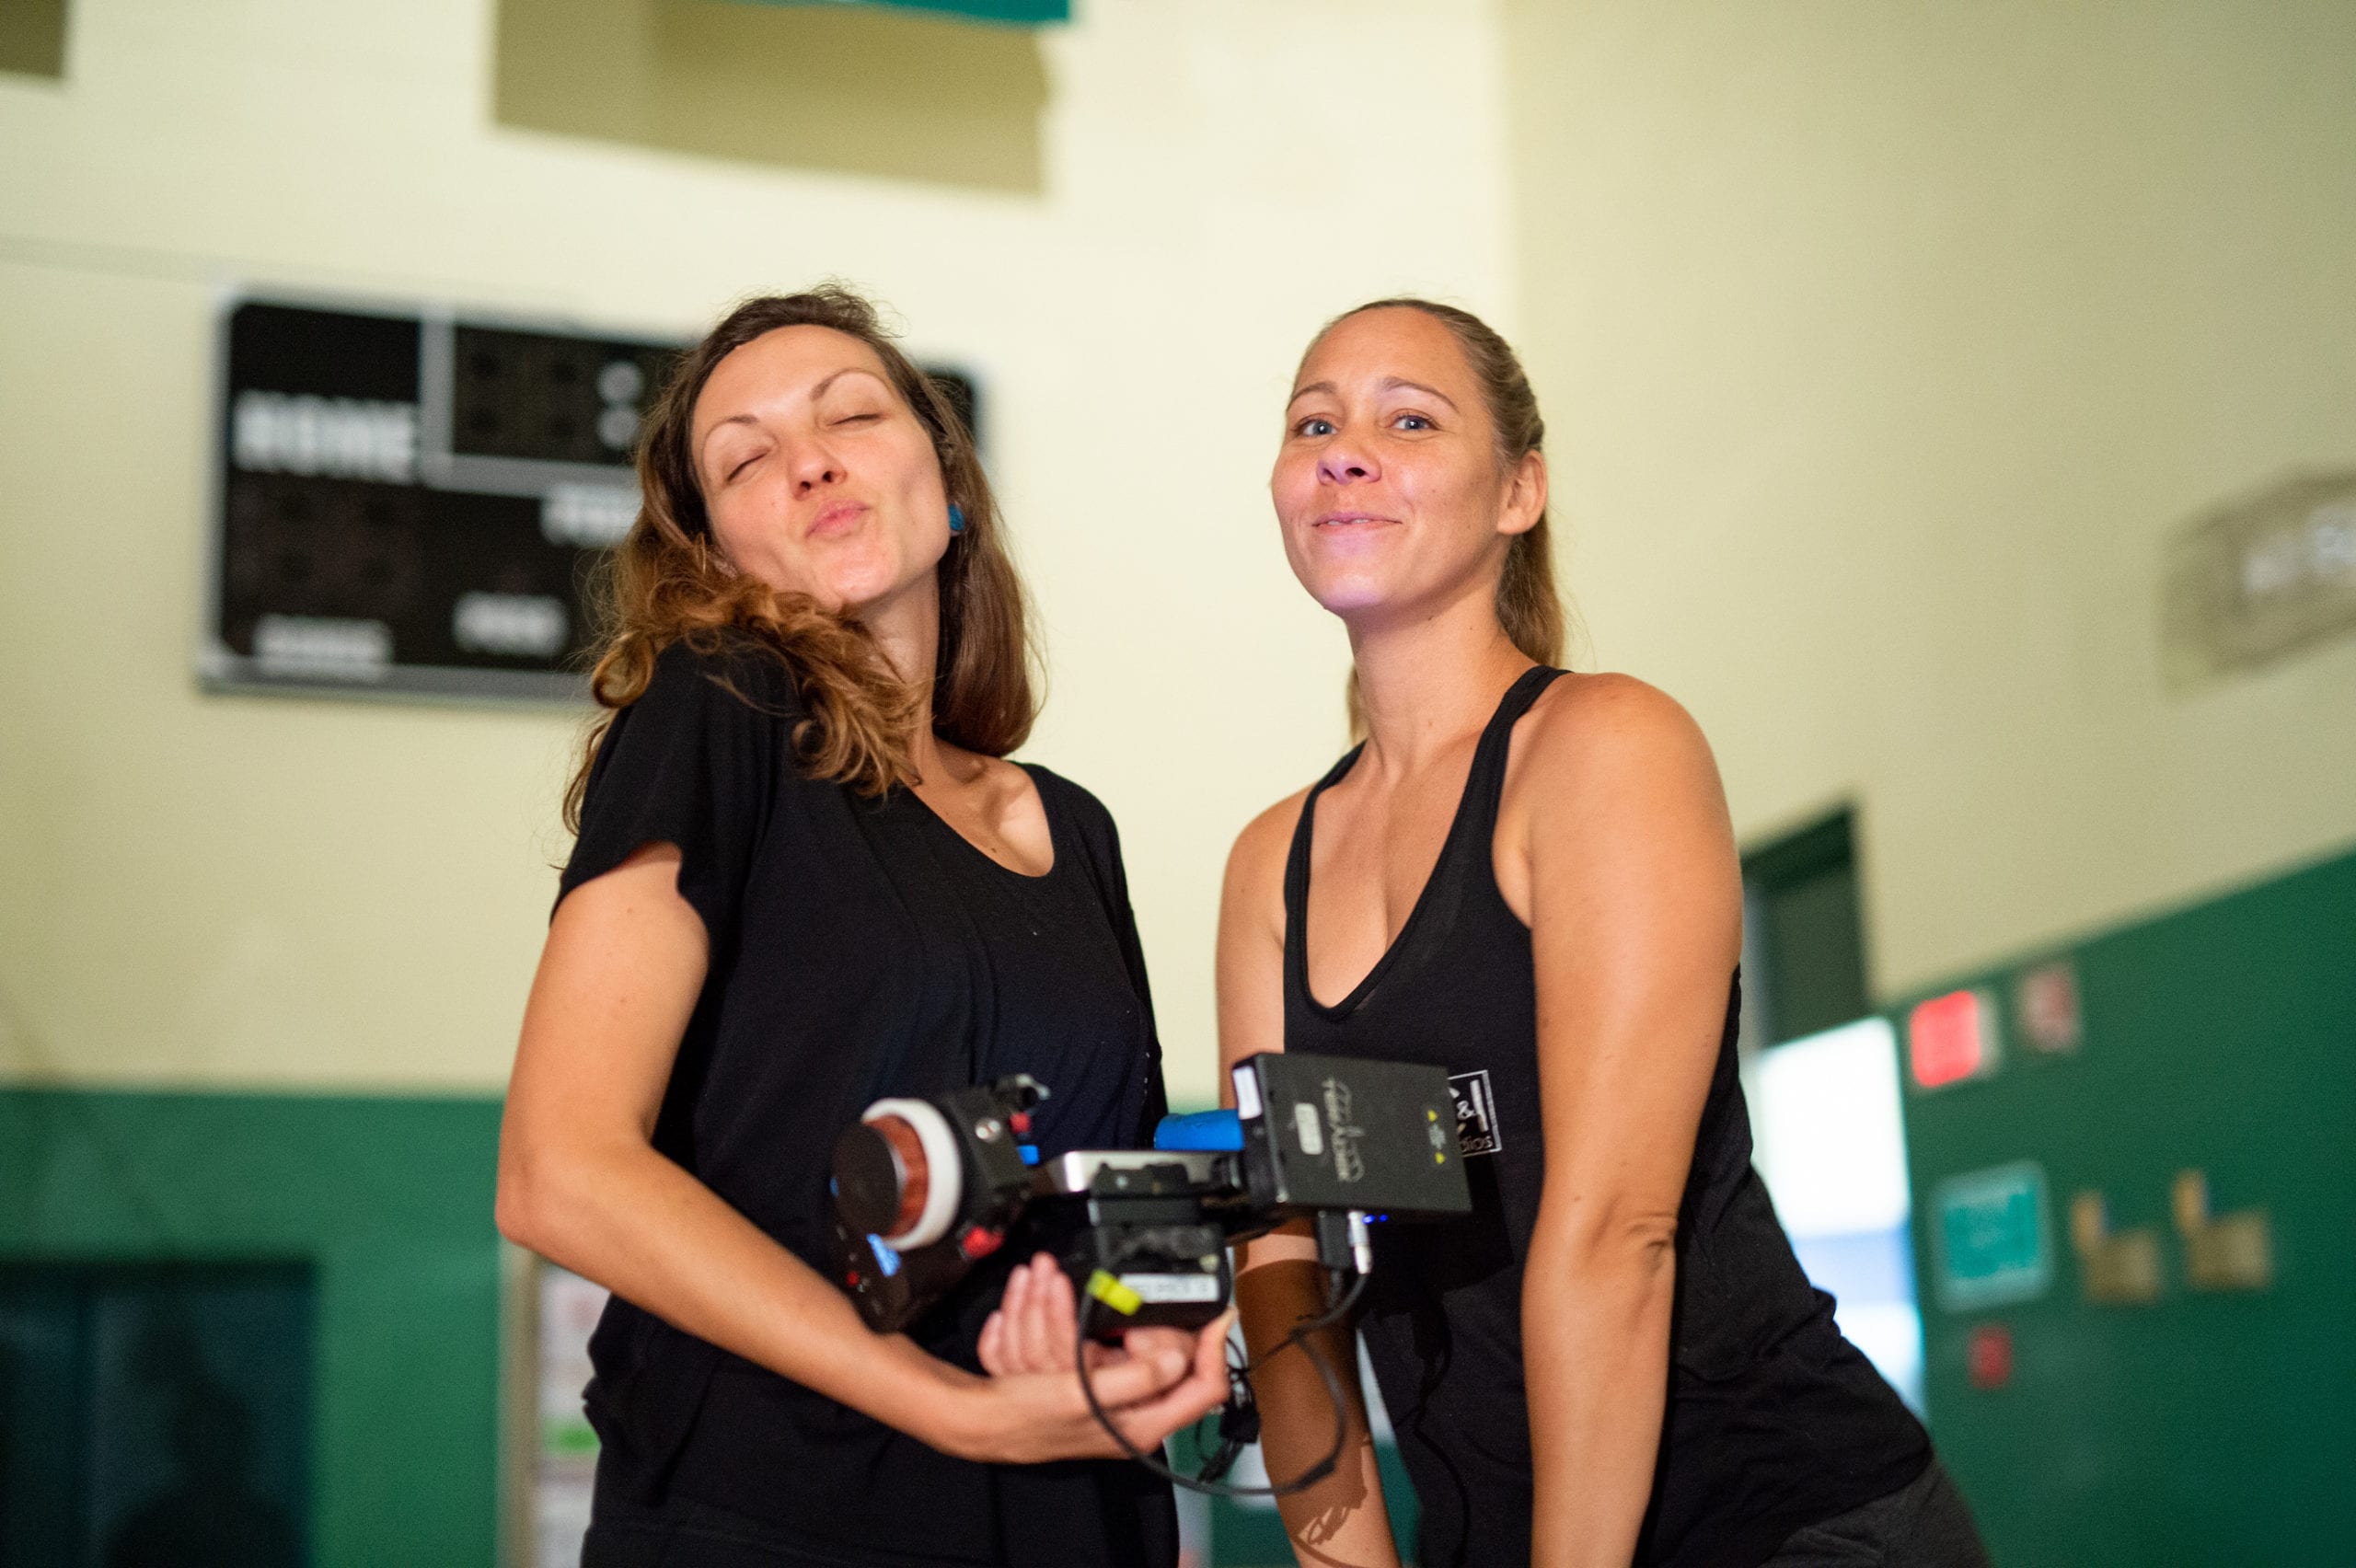 Vloggers creating their first video Female holding a video camera and another woman both posing for the camera